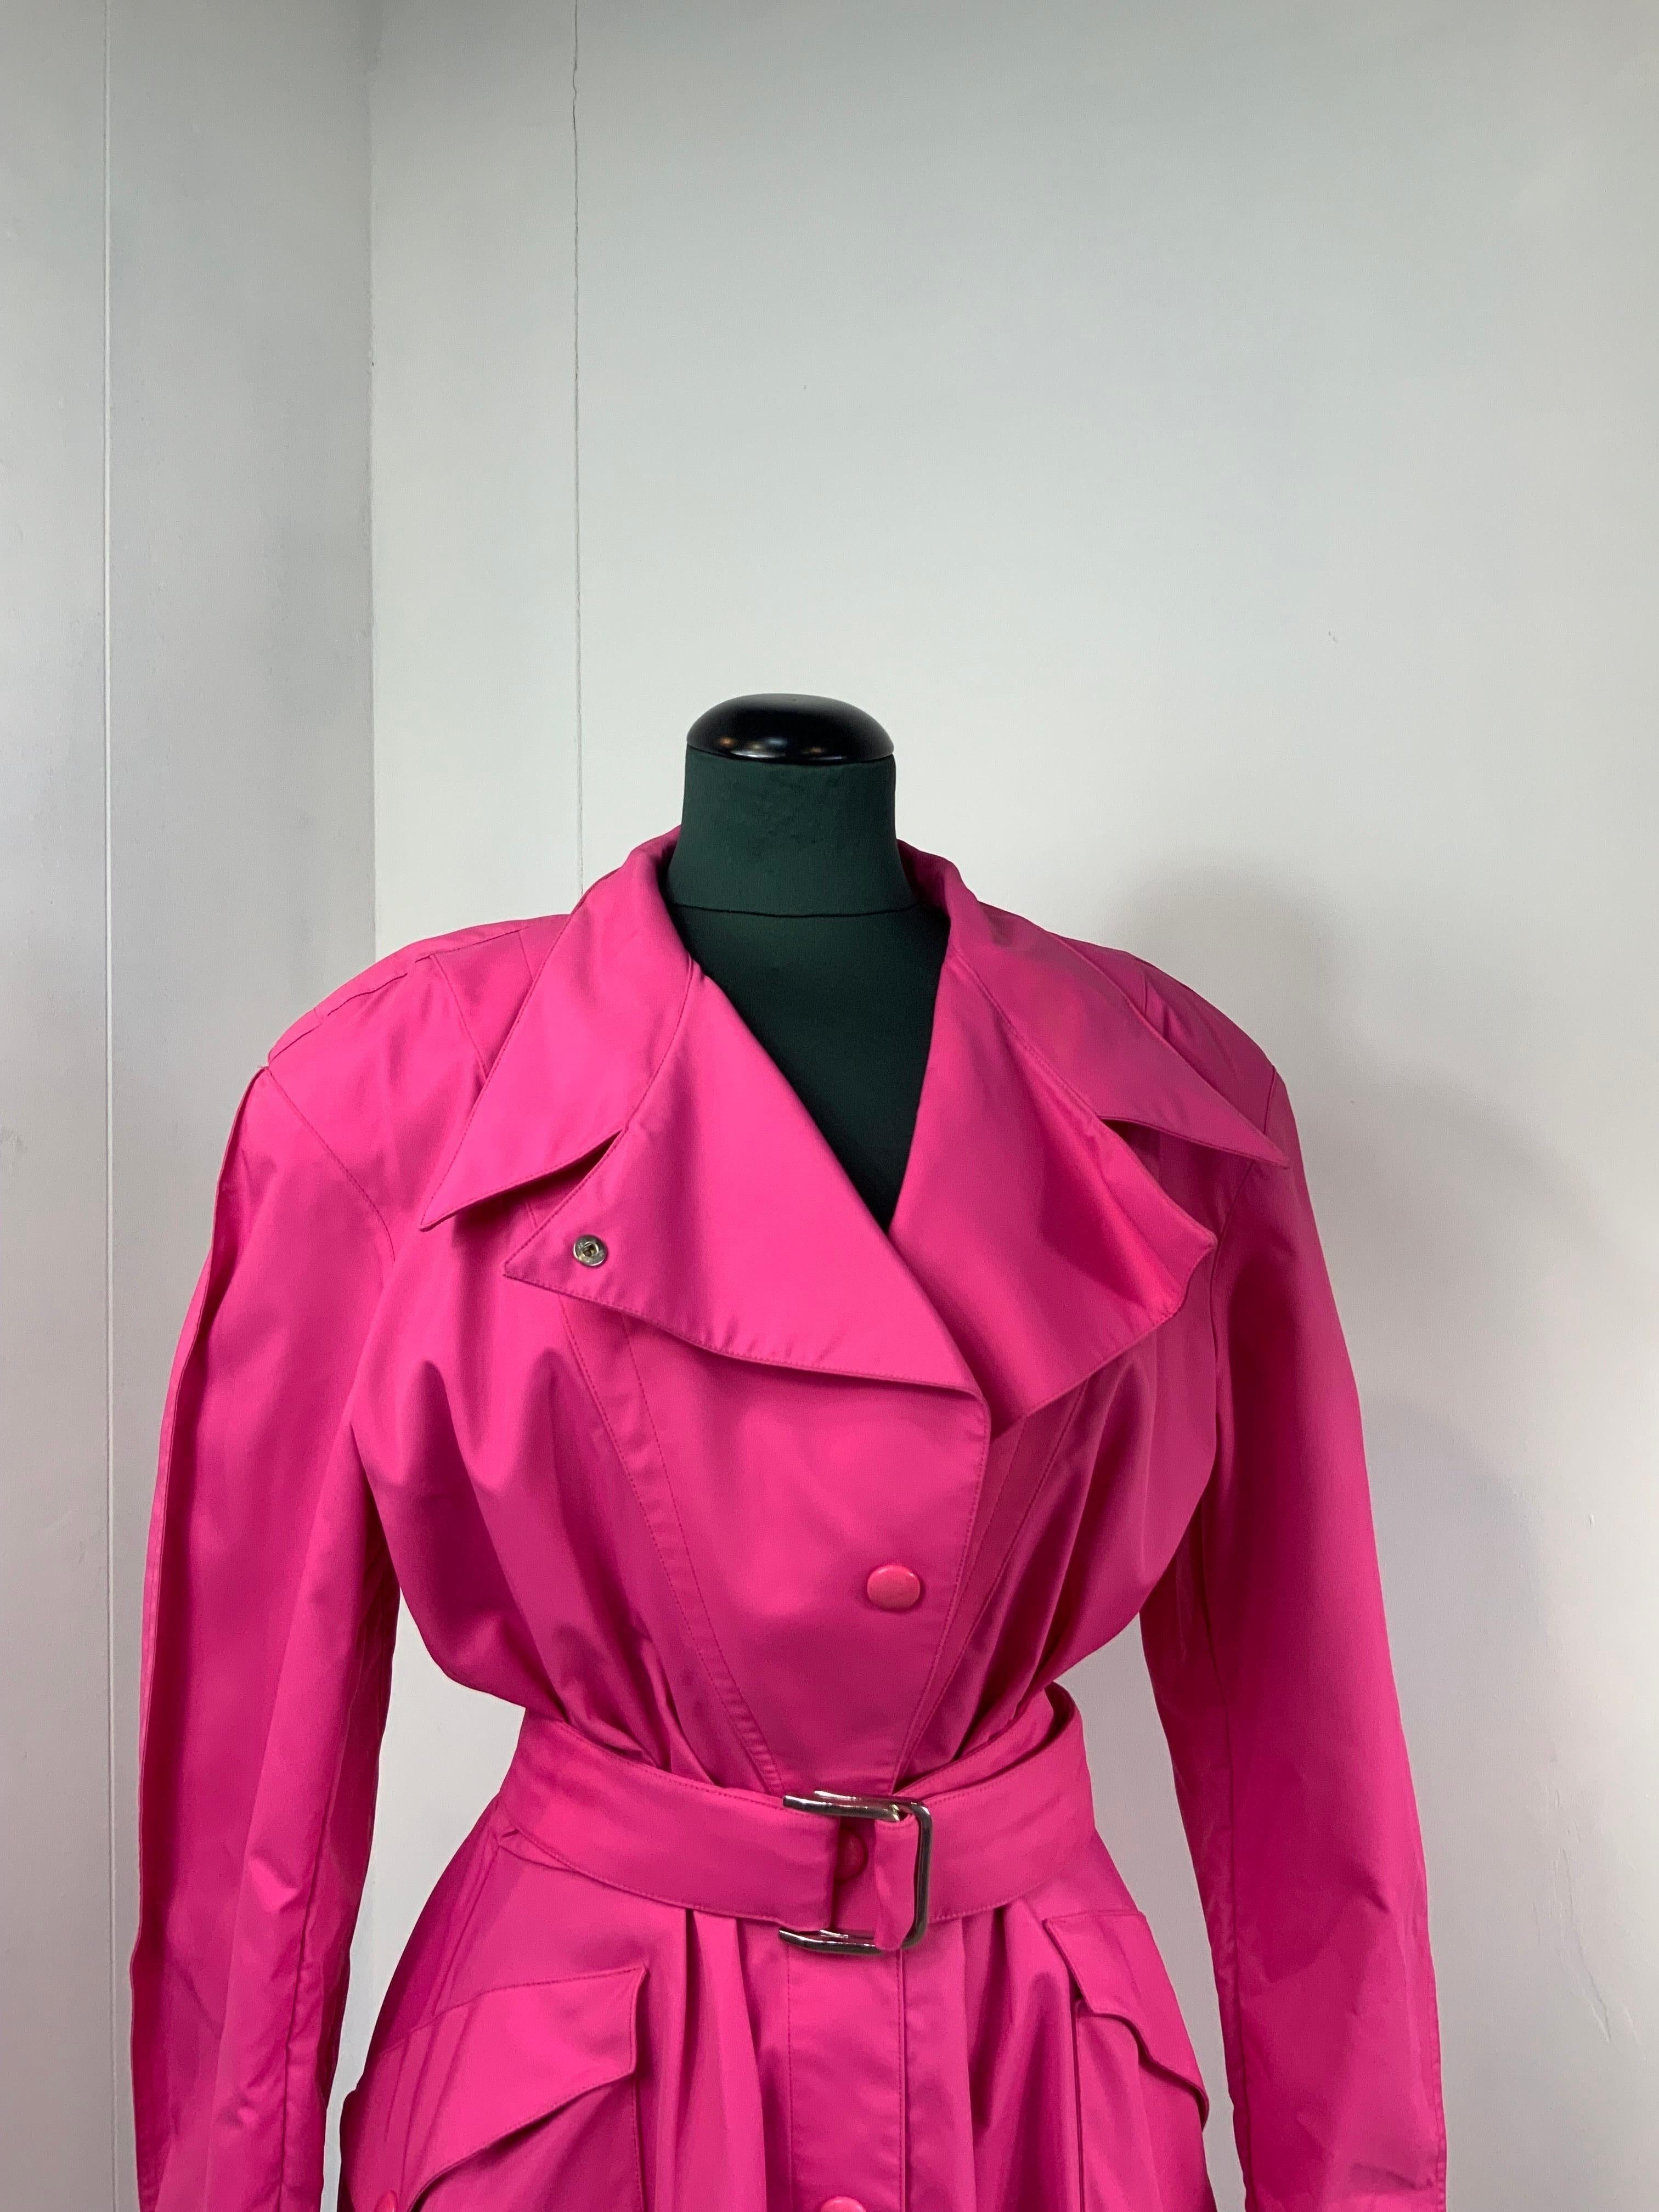 Thierry Mugler Trench.
Featuring polyamide and poliuterame fabrics.
Iconic Mugler piece. Featuring padded shoulders. 
Size tag is missing but it fits more size.
Shoulders 48 cm
Bust 48 cm
Waist 33 cm
Length 110
Sleeves 66
Conditions: very good- it